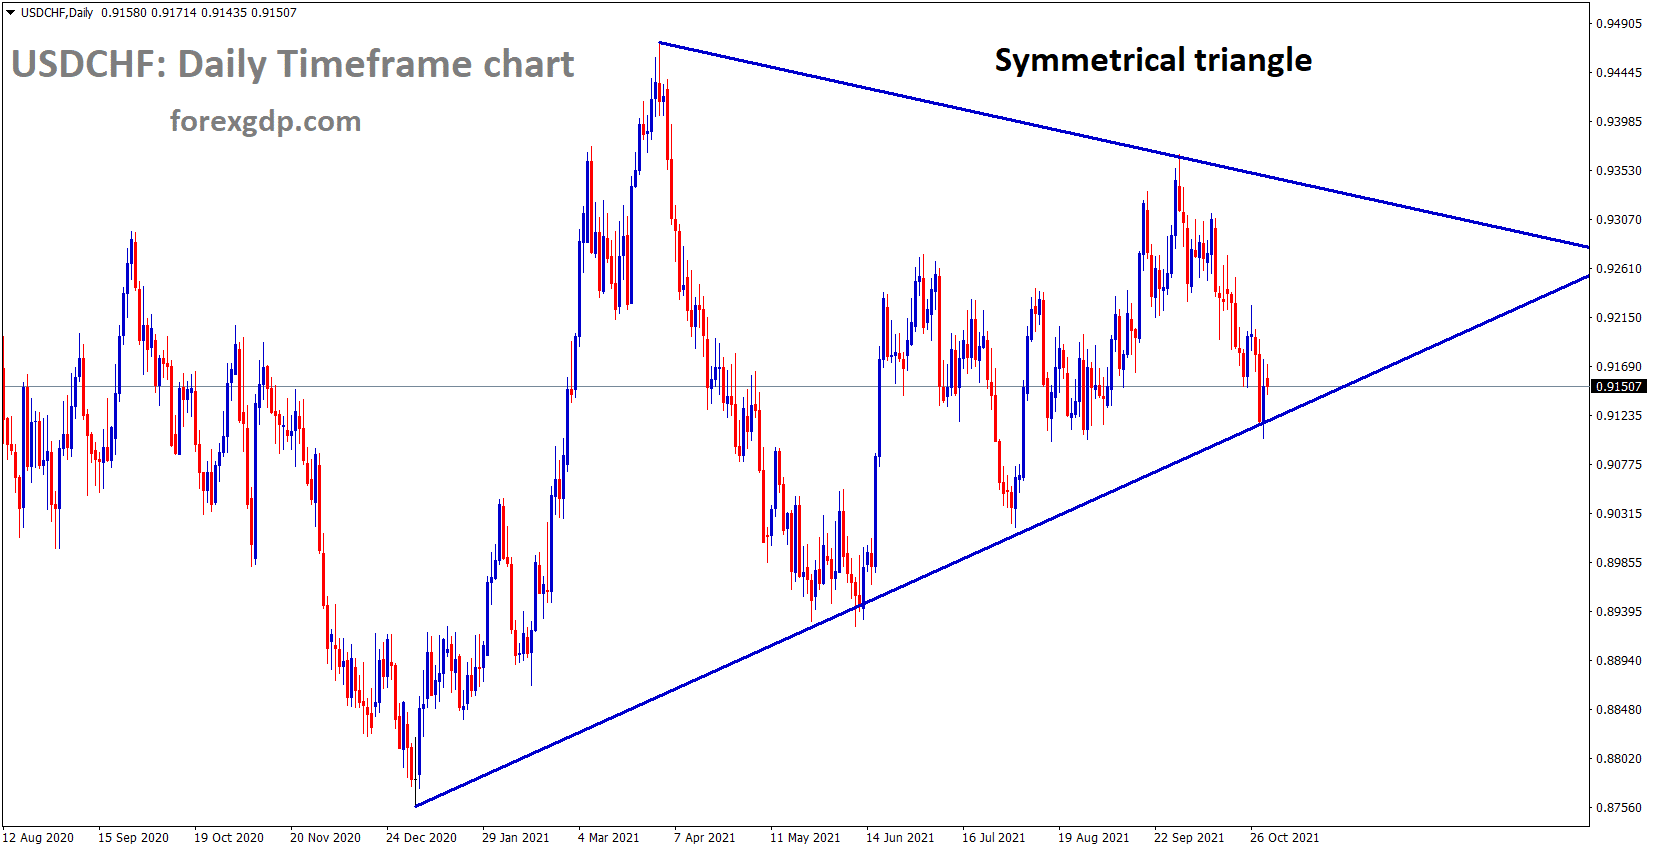 USDCHF is moving in the Symmetrical triangle pattern